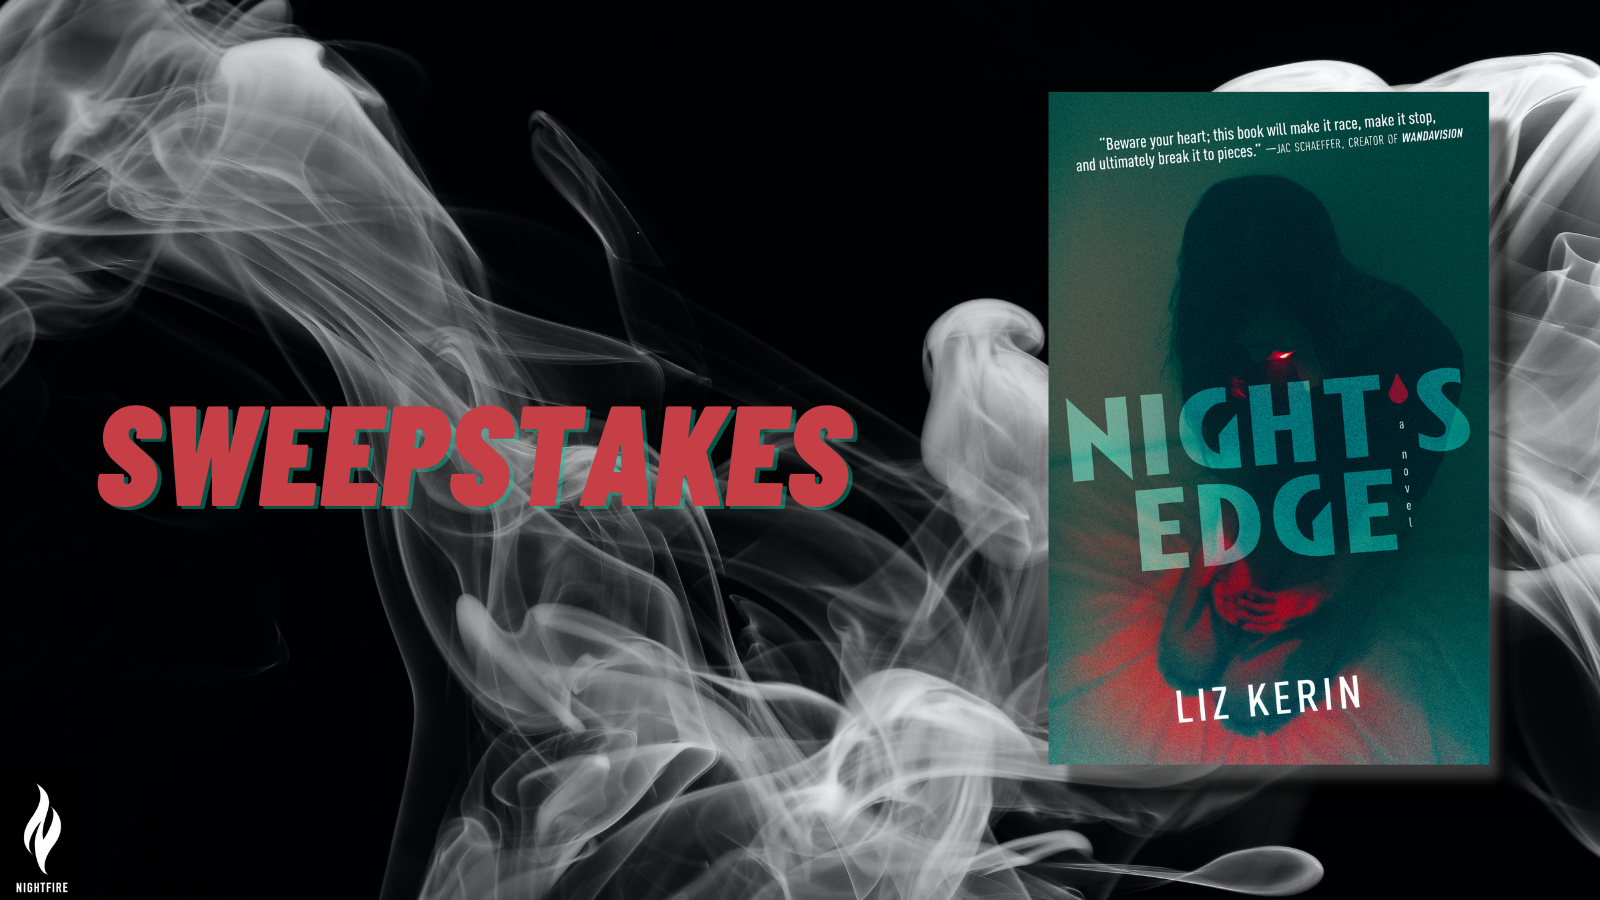 Night's Edge Sweepstakes Rules - 273